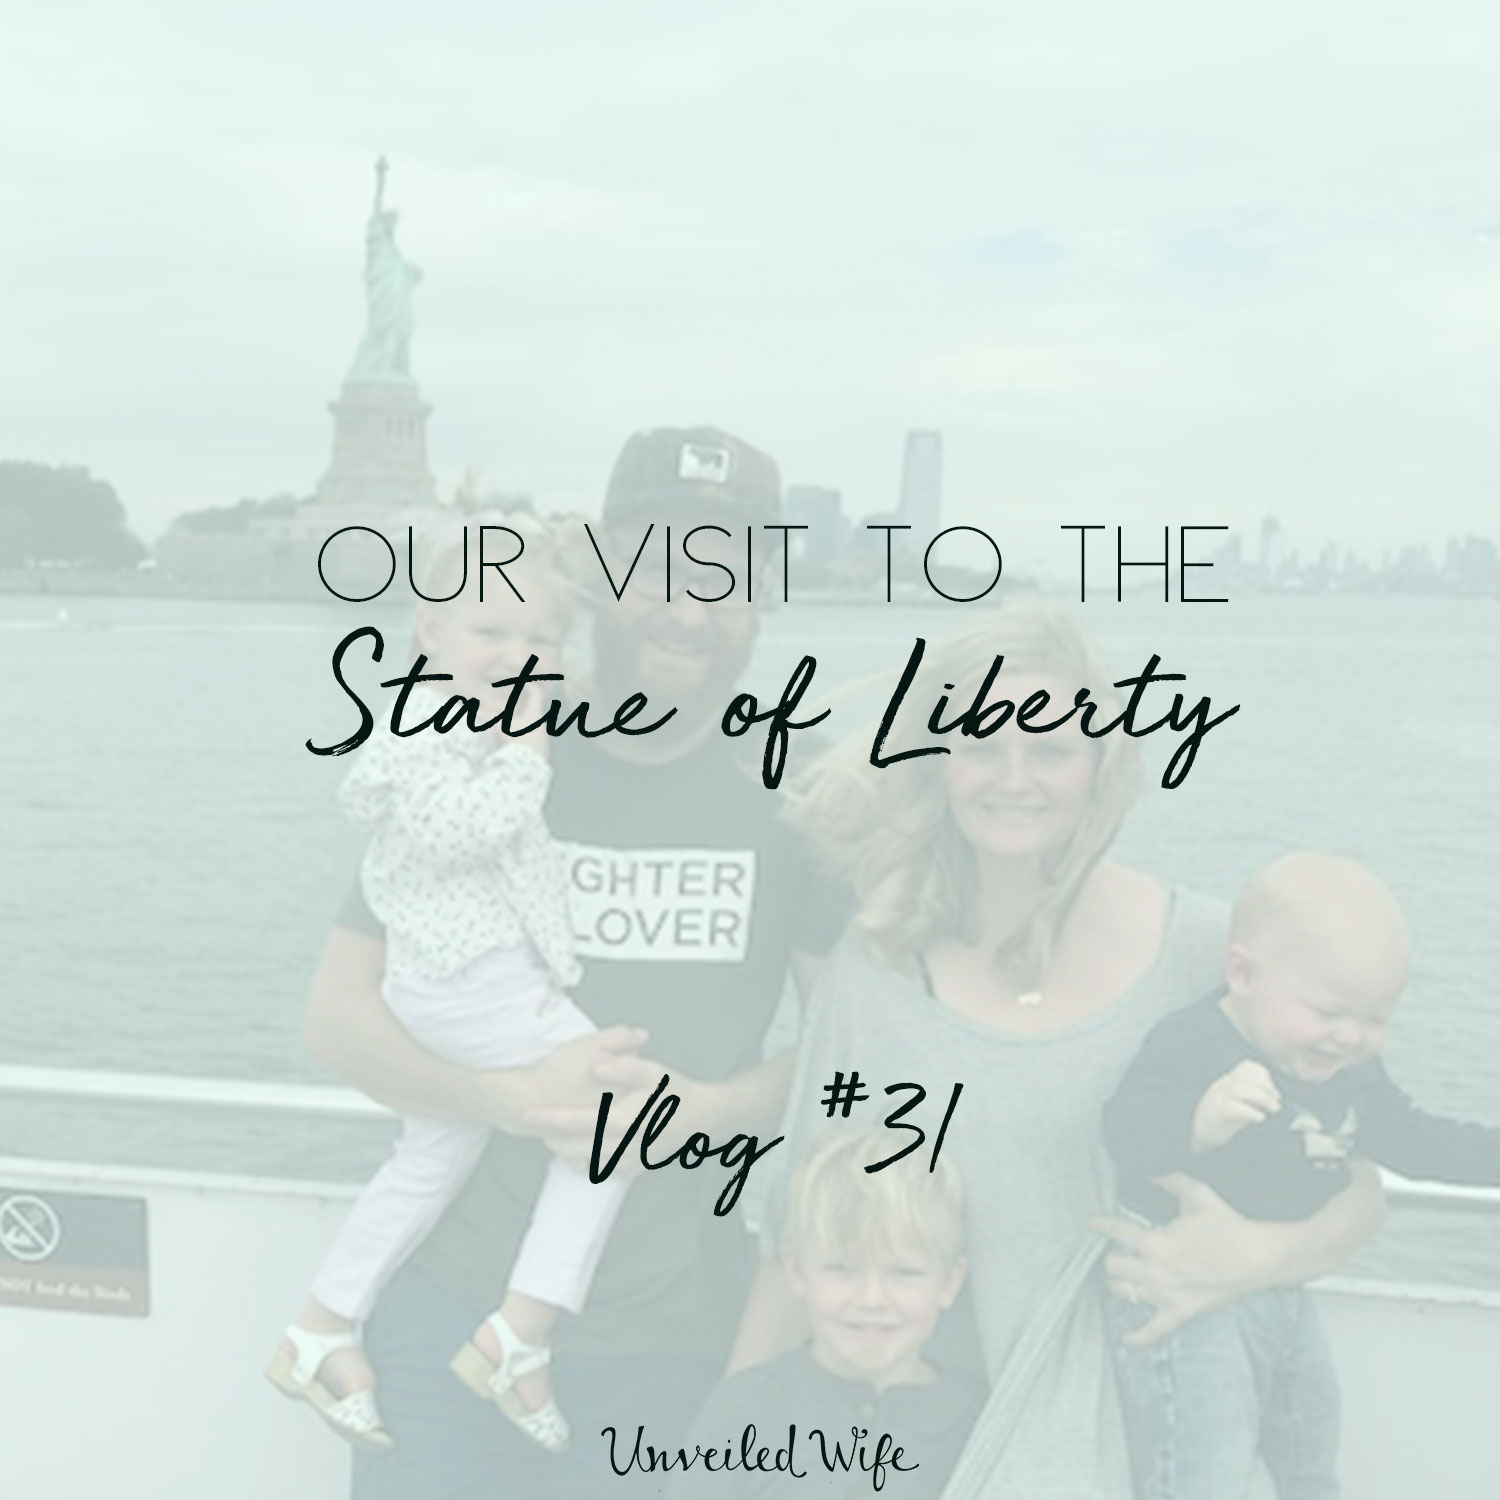 Seeing The Statue Of Liberty In NYC